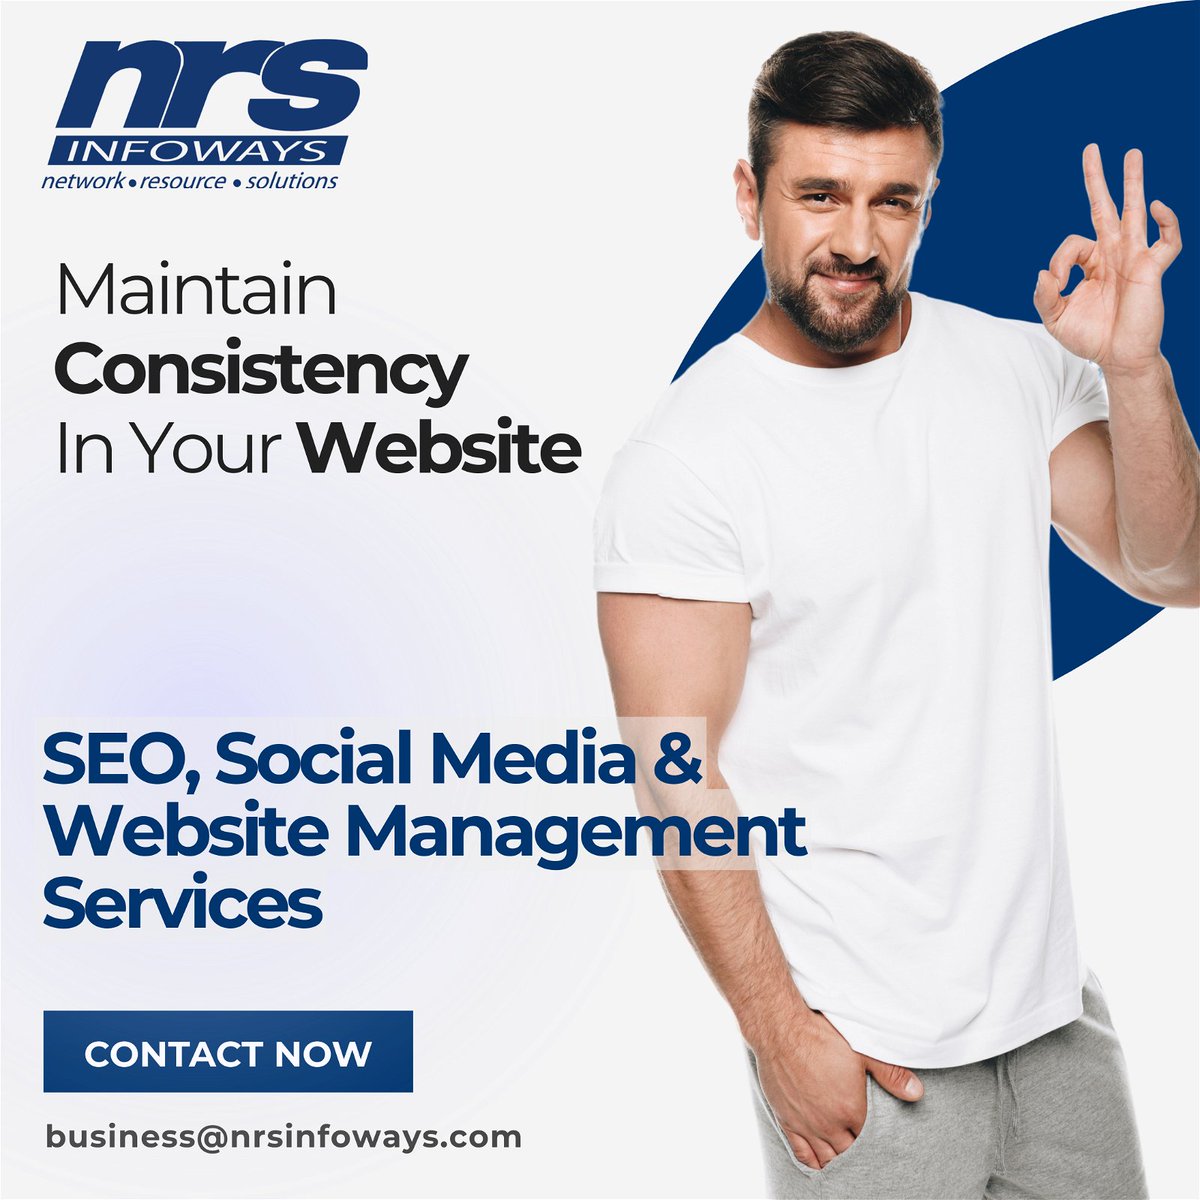 Mantain Consistency In Your Website

Consistency in design, tone, and messaging across all pages of a website can make the user experience more cohesive and enjoyable.

We can help
Lets discuss business@nrsinfoways.com
#webdesign #consistency #digitalmarketing #seo #nrsinfoways